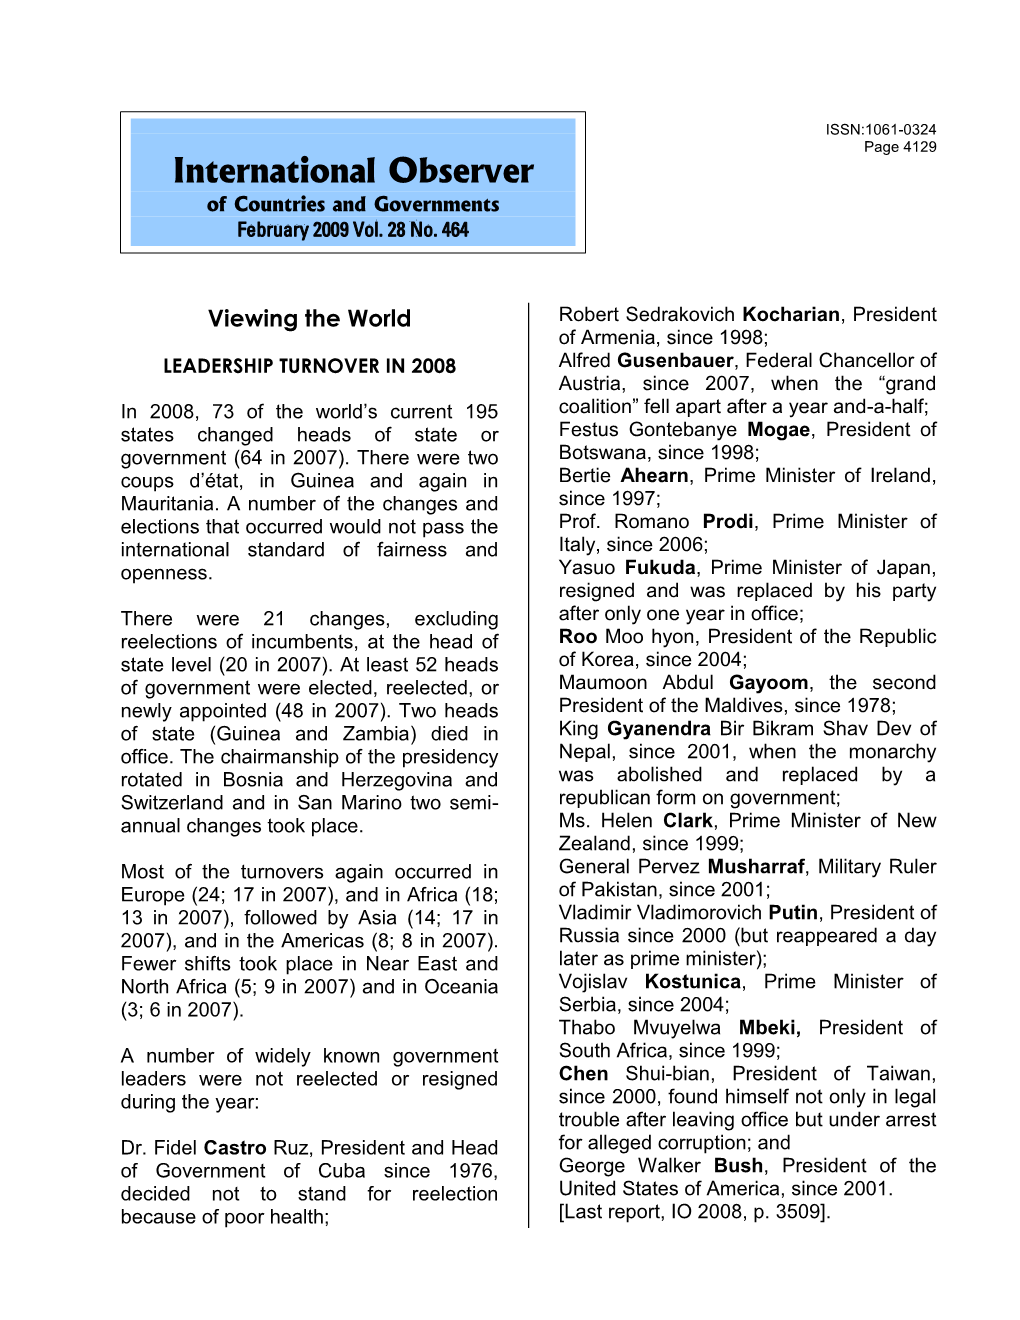 International Observer of Countries and Governments February 2009 Vol